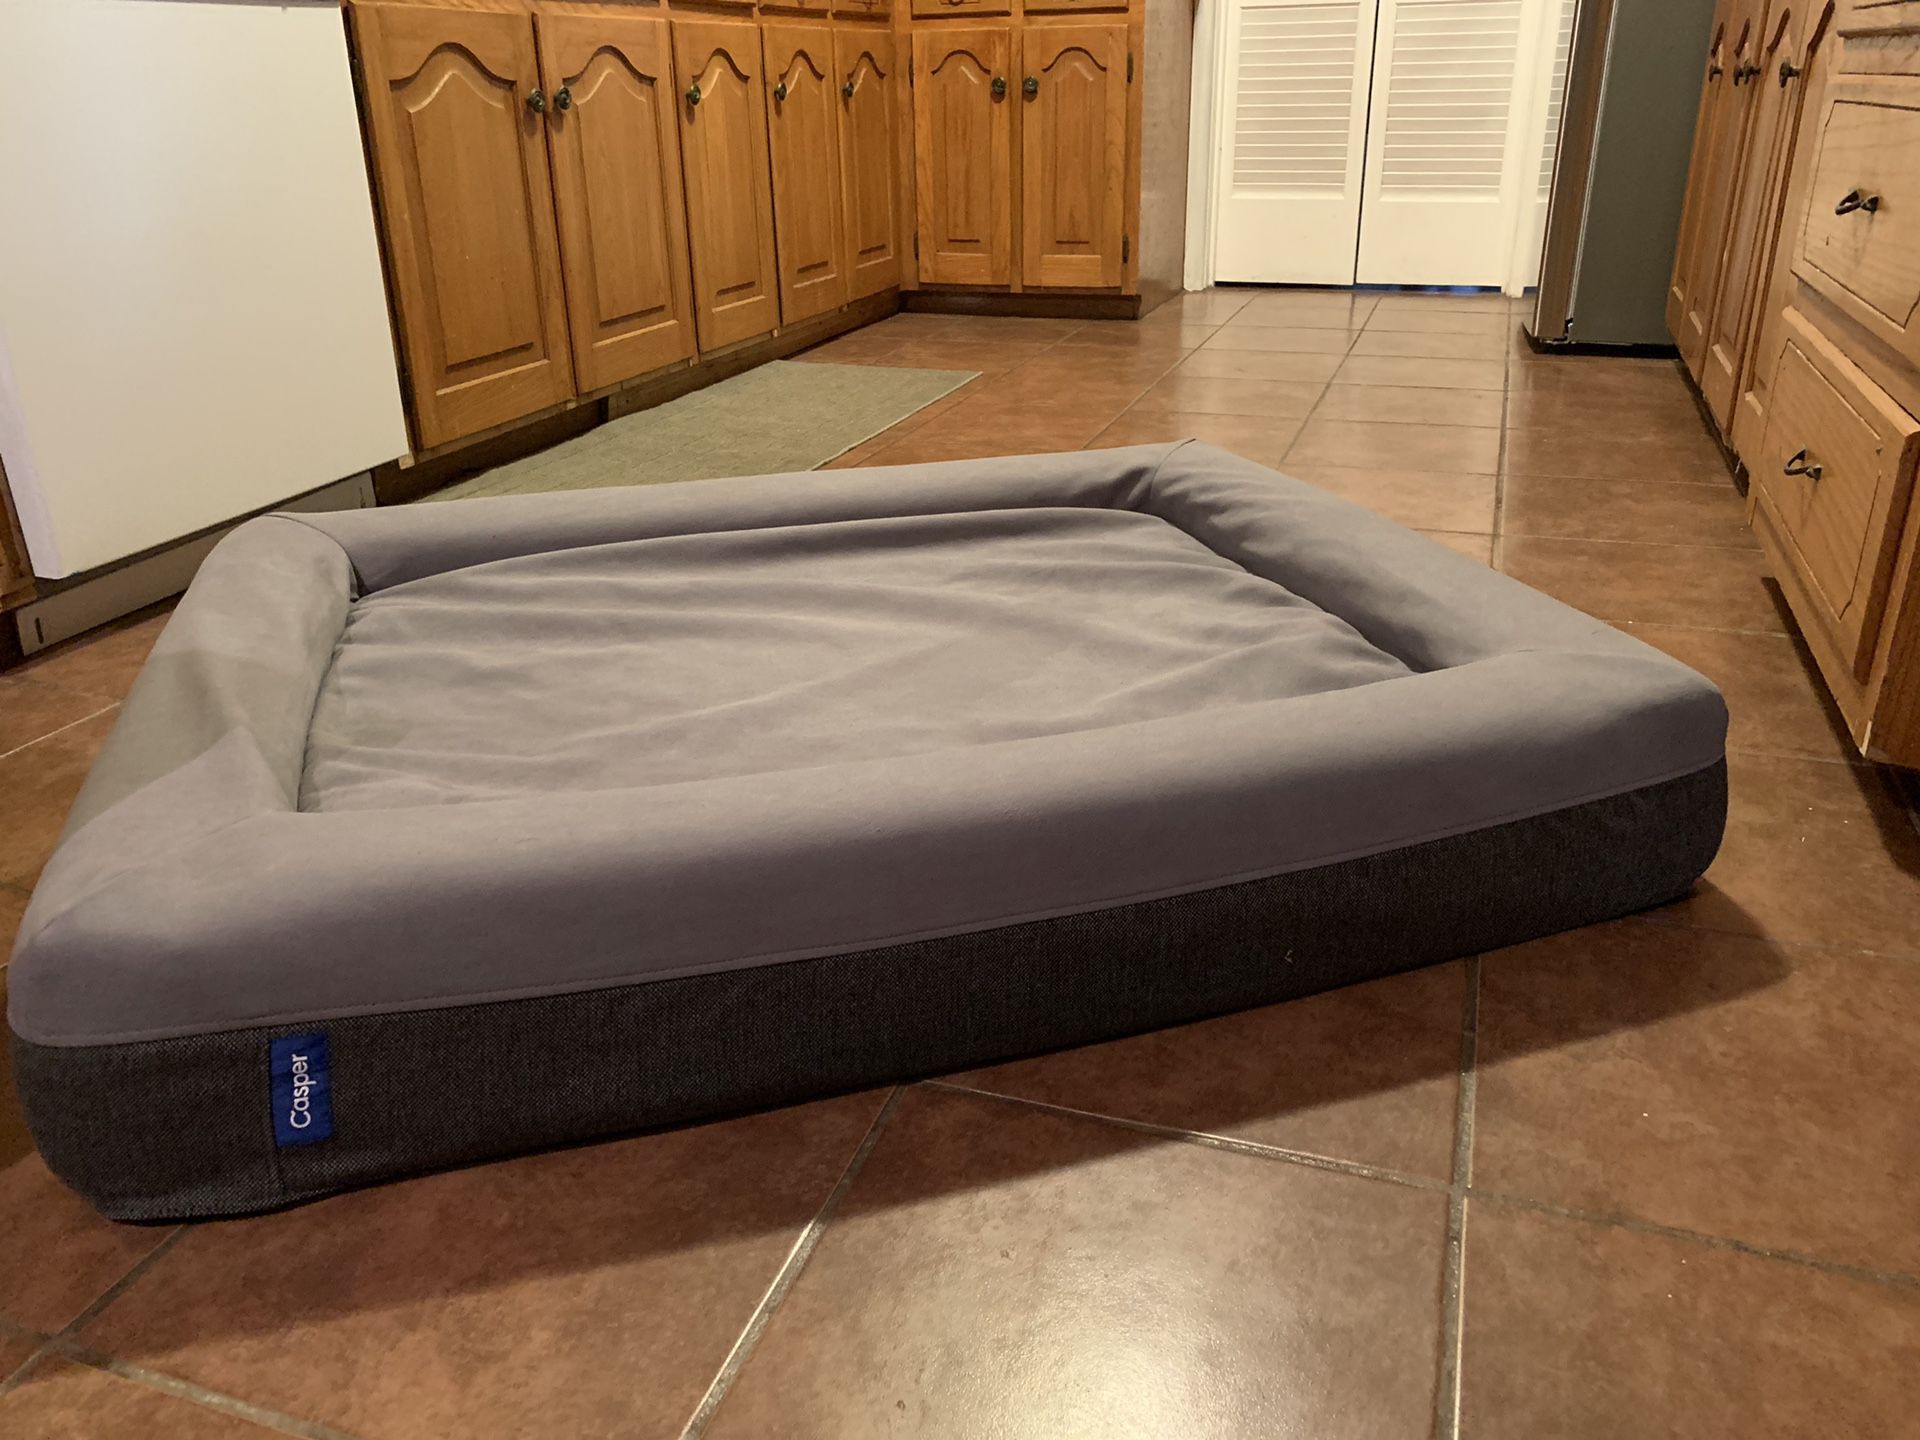 Casper large dog bed slightly used and a free large crate for your baby!!